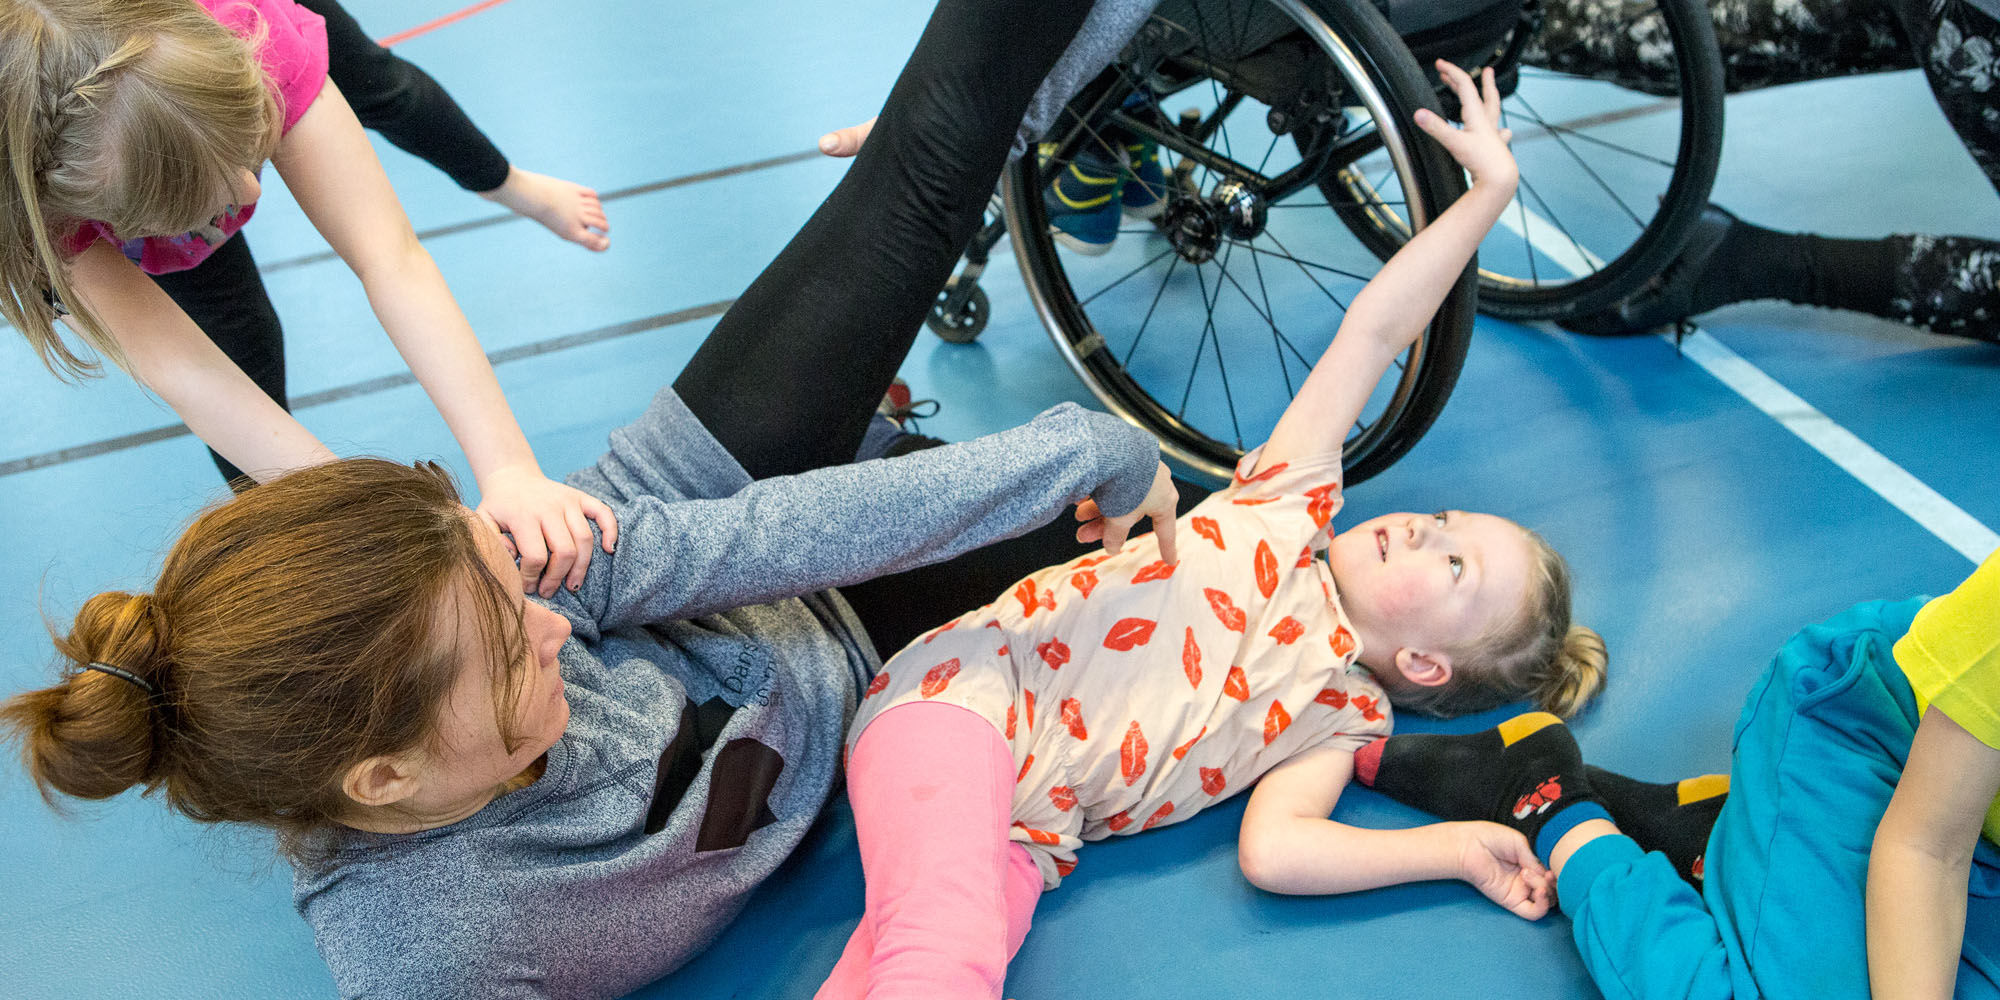 Image from dance workshop for children with dancers from Spinn. Photo: Maja Blomqvist